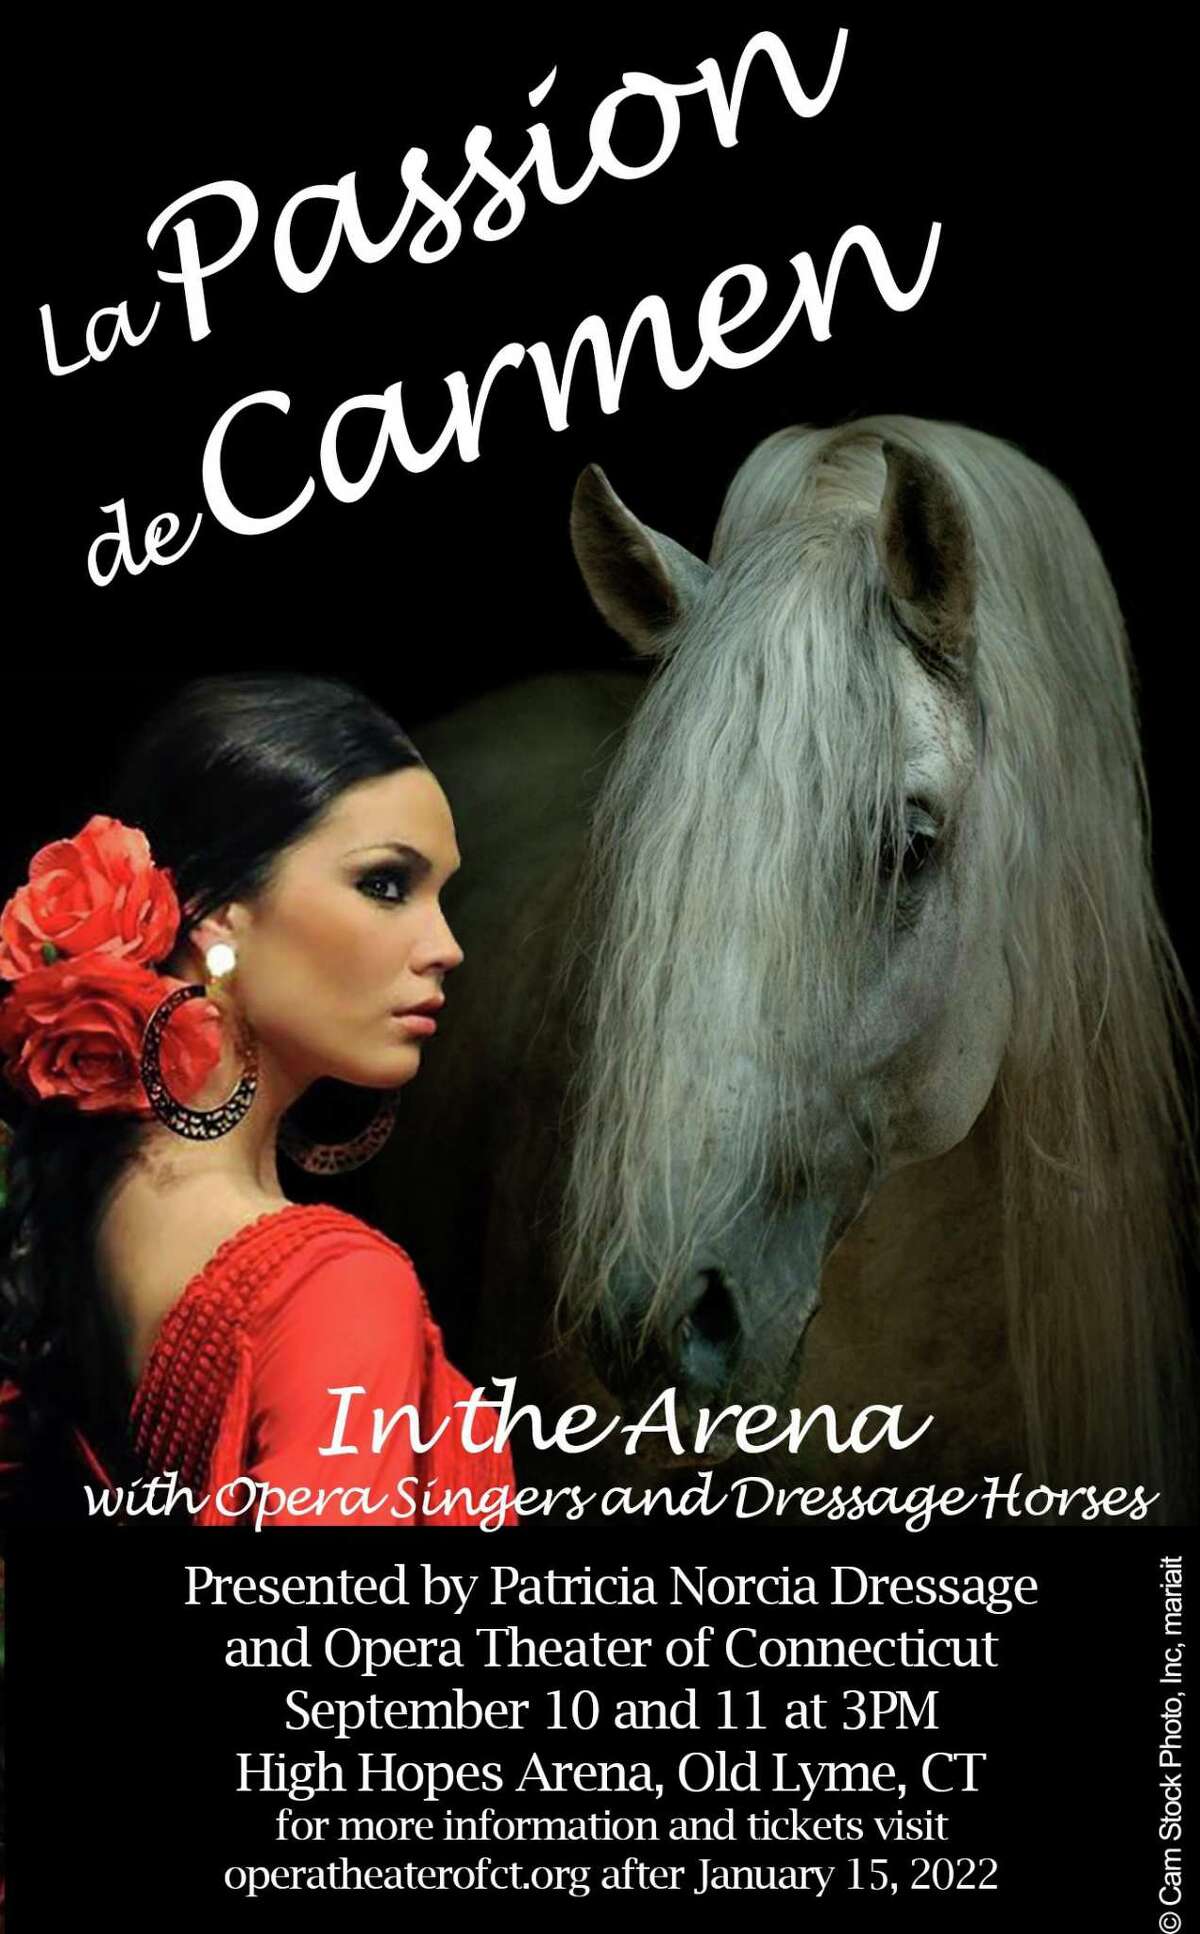 Members of the Opera Theater of Connecticut will present “La Passion de Carmen” Sept. 10 and 11.